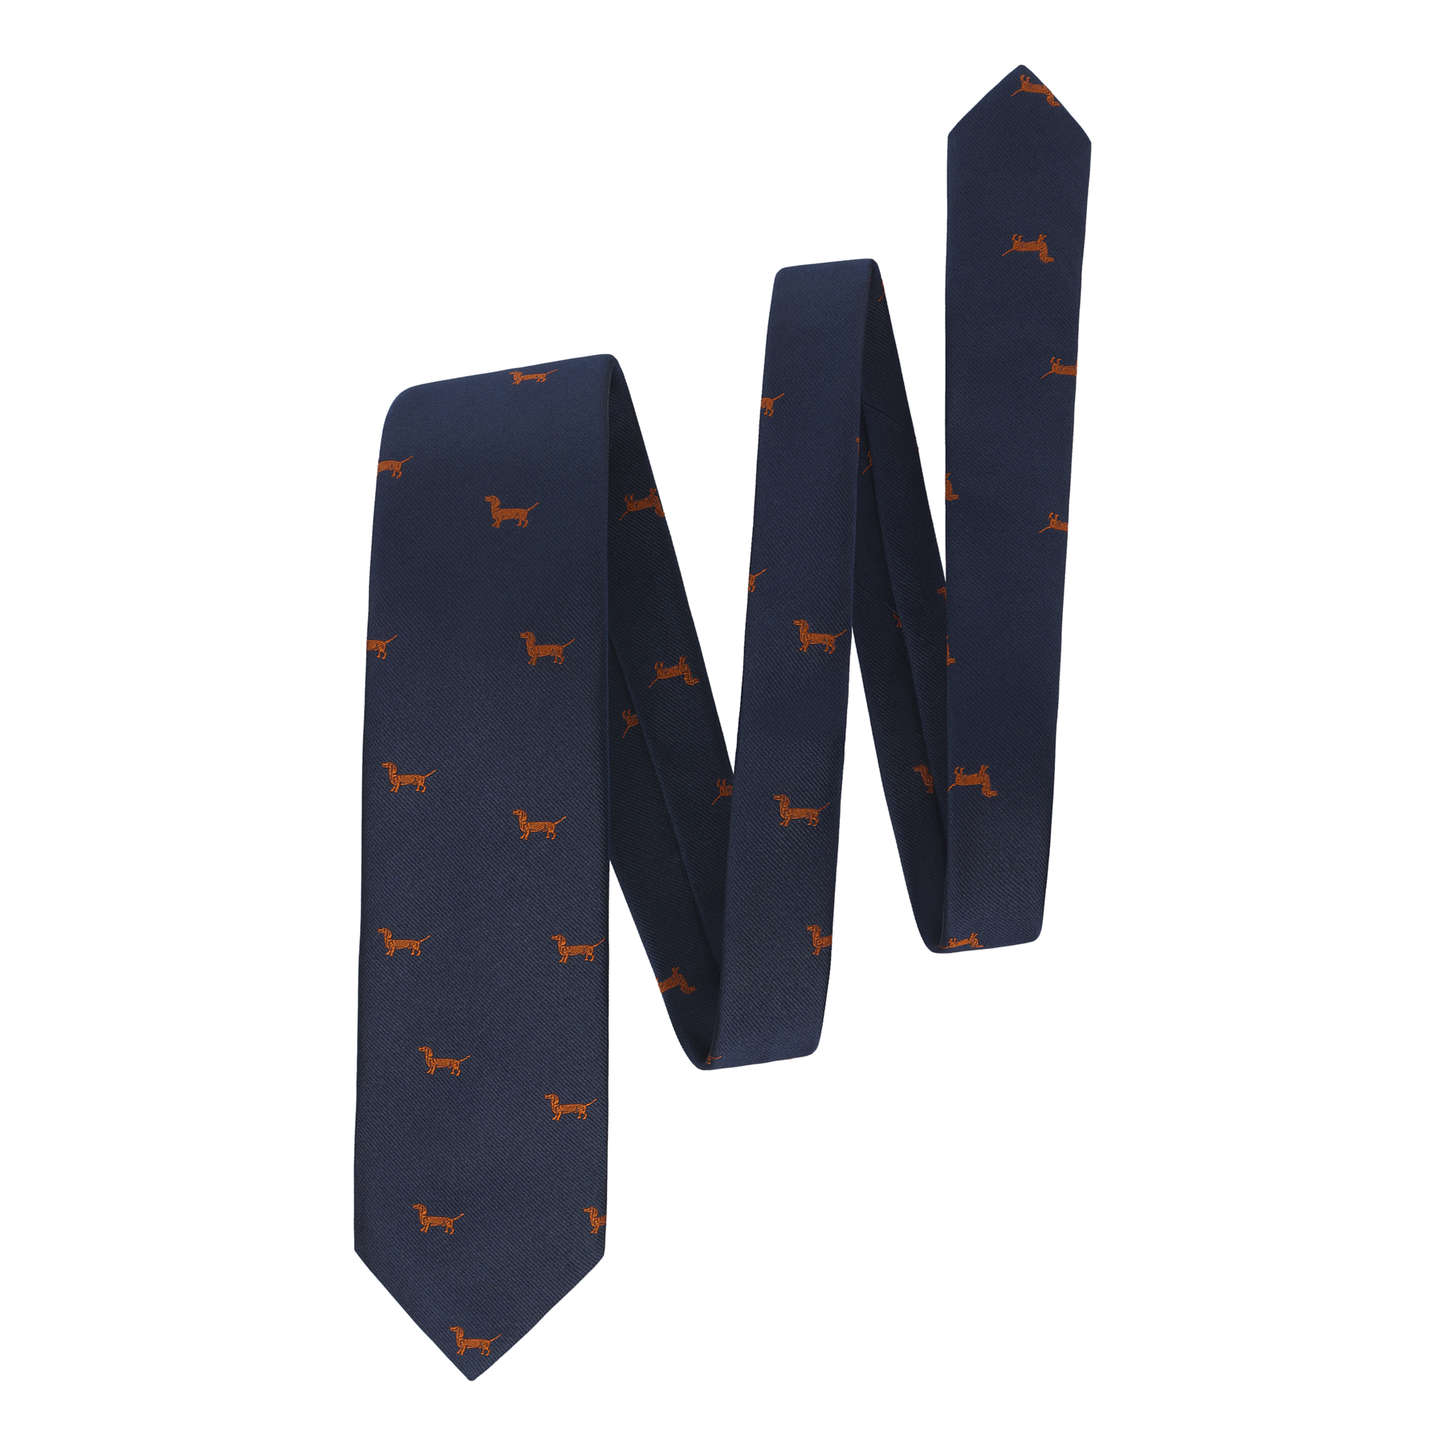 Embroidered Woven Silk Navy Tie with Design